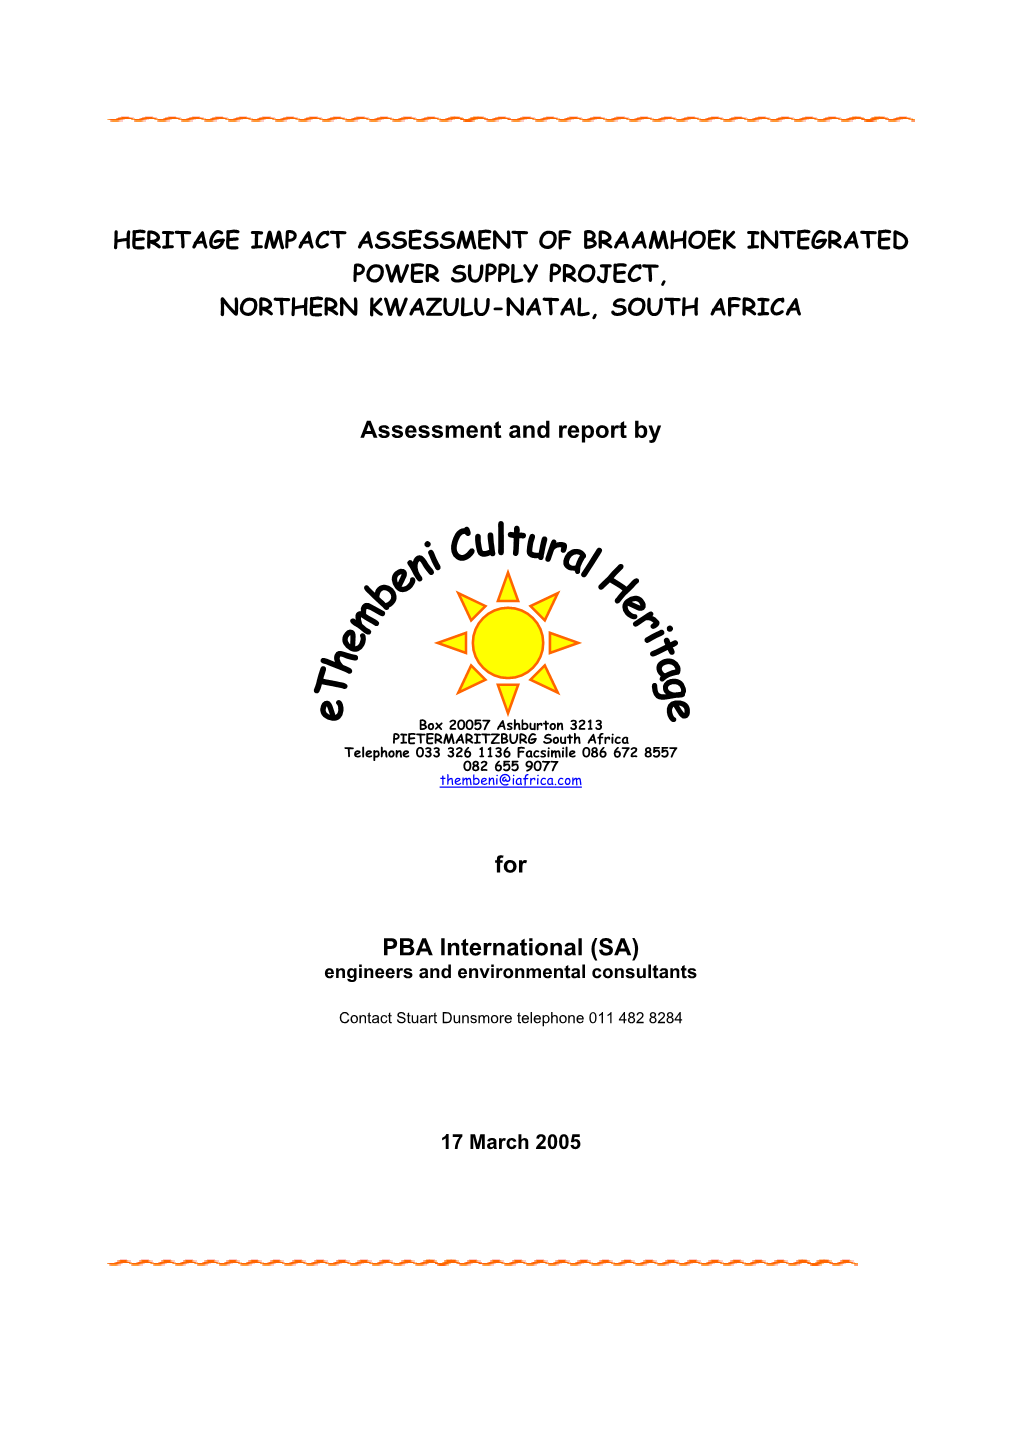 Heritage Impact Assessment of Braamhoek Integrated Power Supply Project, Northern Kwazulu-Natal, South Africa